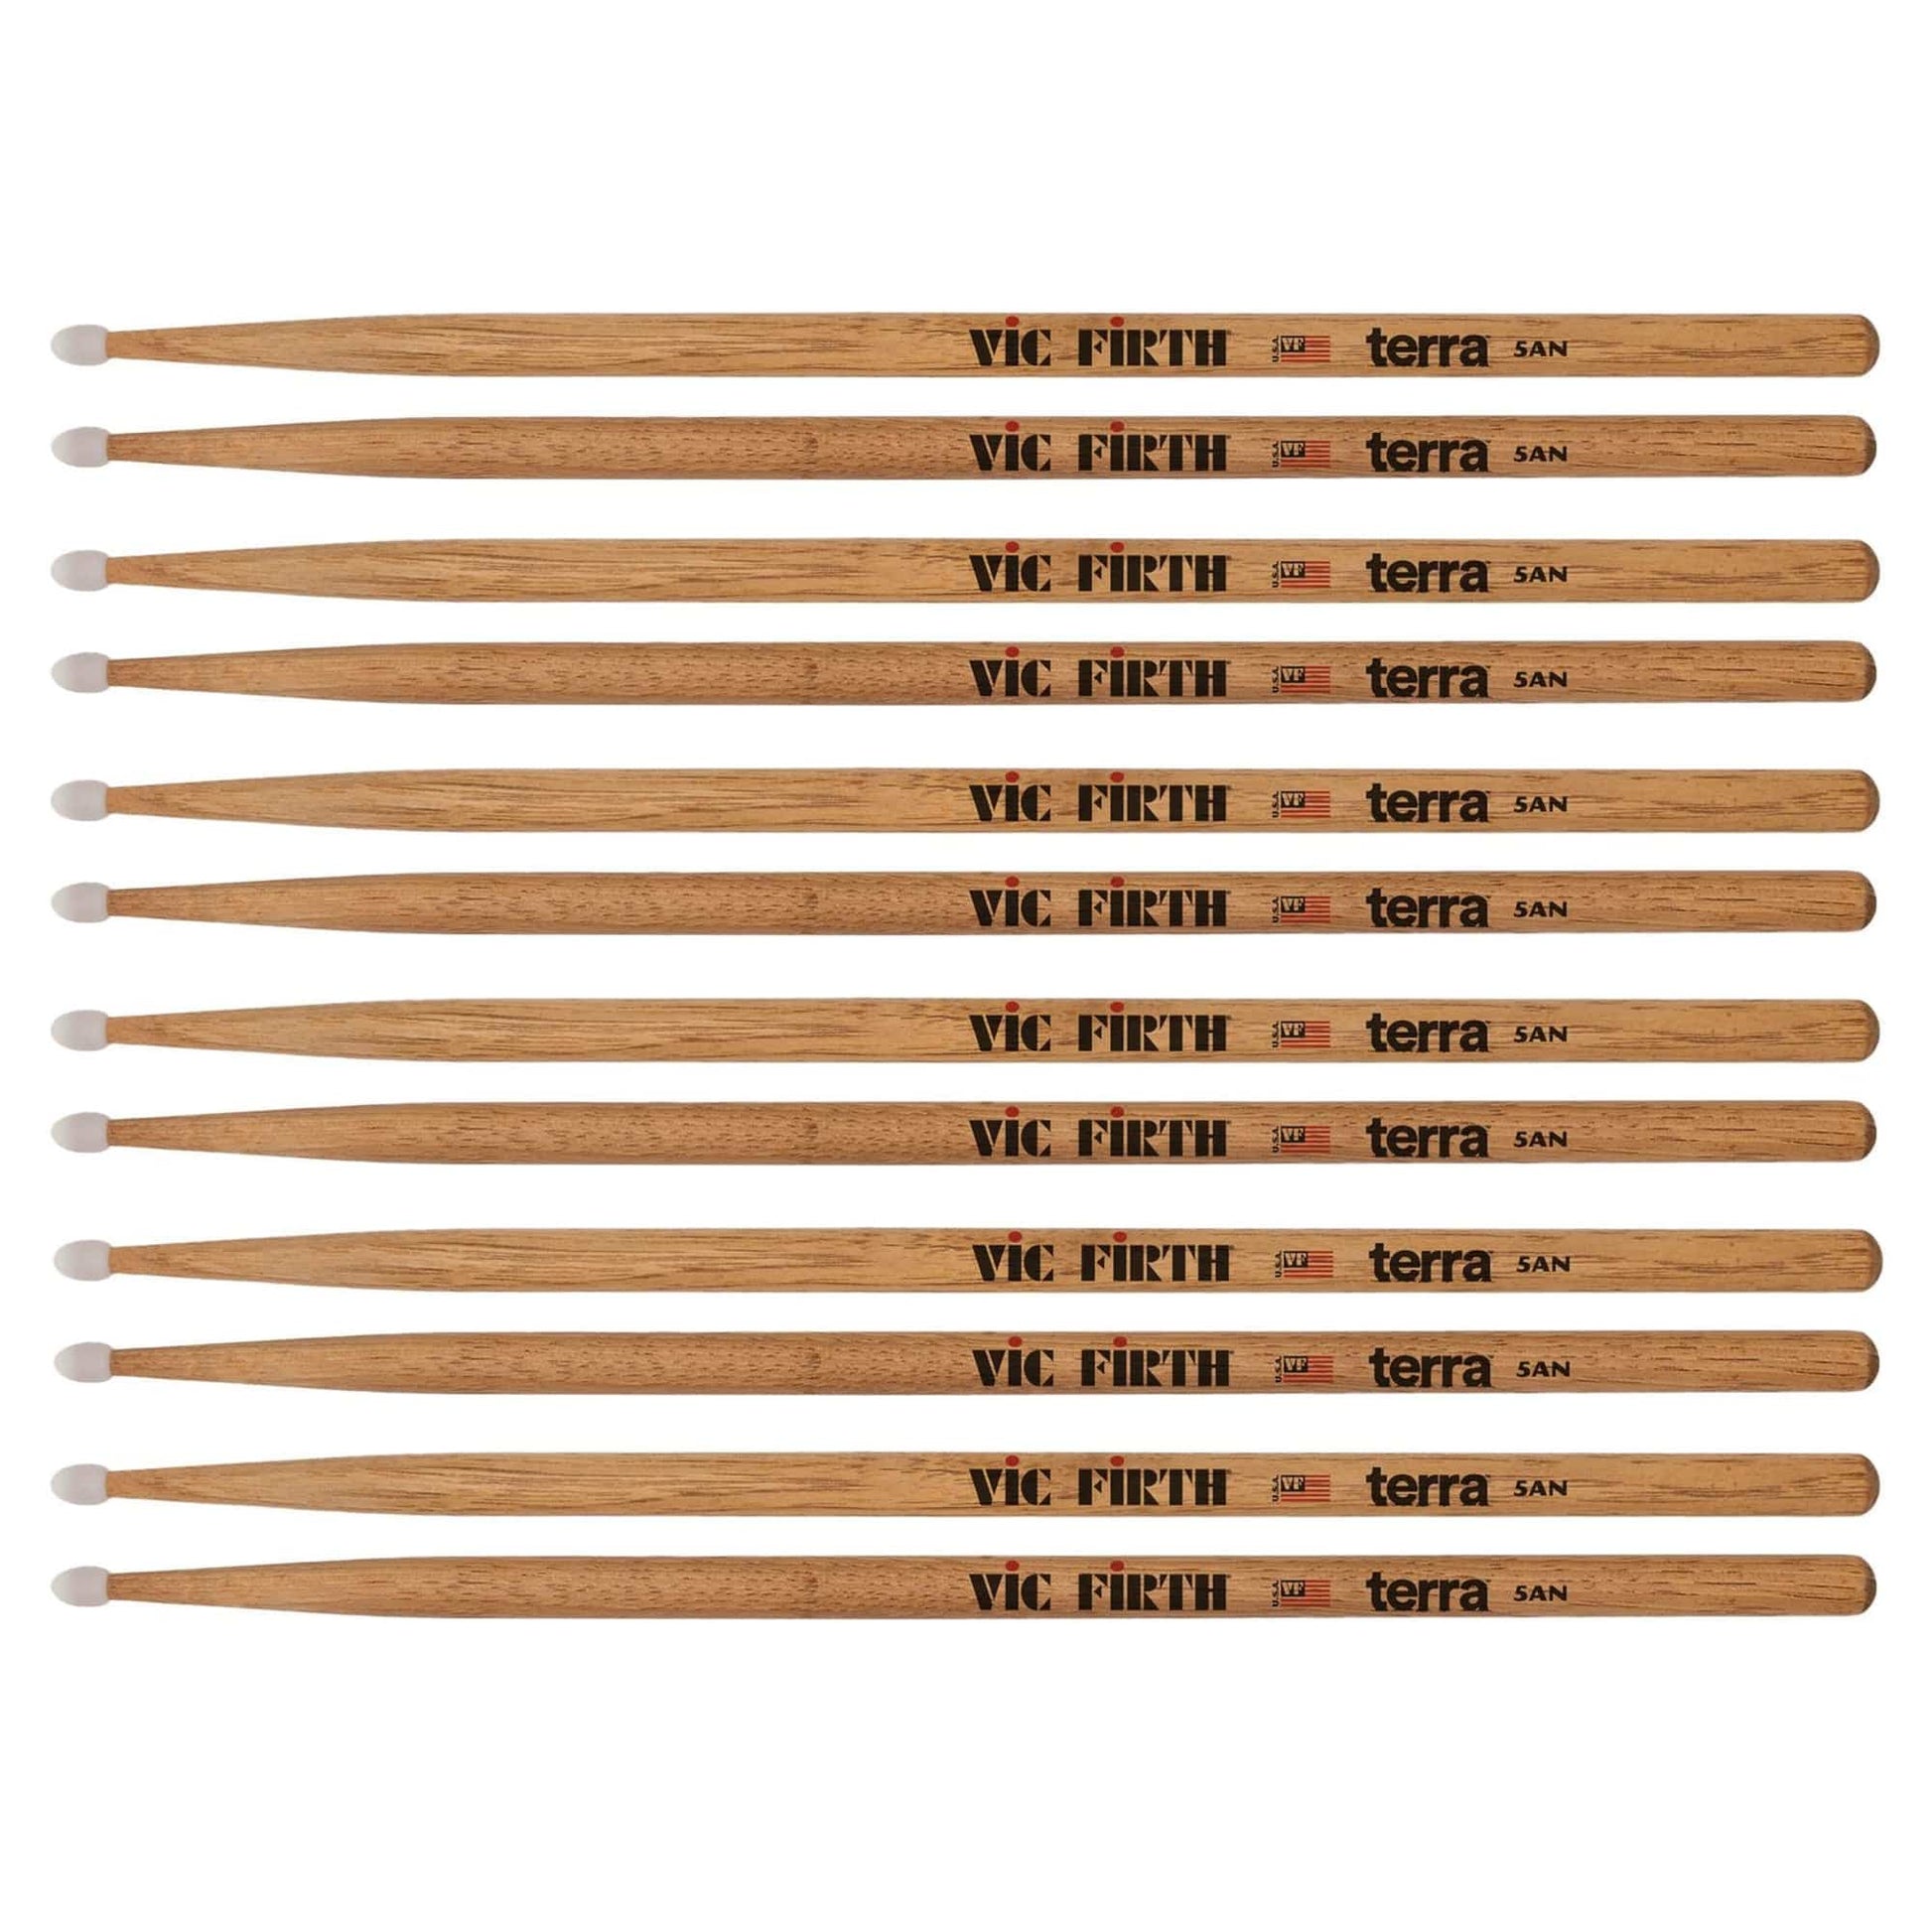 Vic Firth American Classic 5ATN Terra Nylon Tip Drum Sticks 6-Pack Bundle Drums and Percussion / Parts and Accessories / Drum Sticks and Mallets